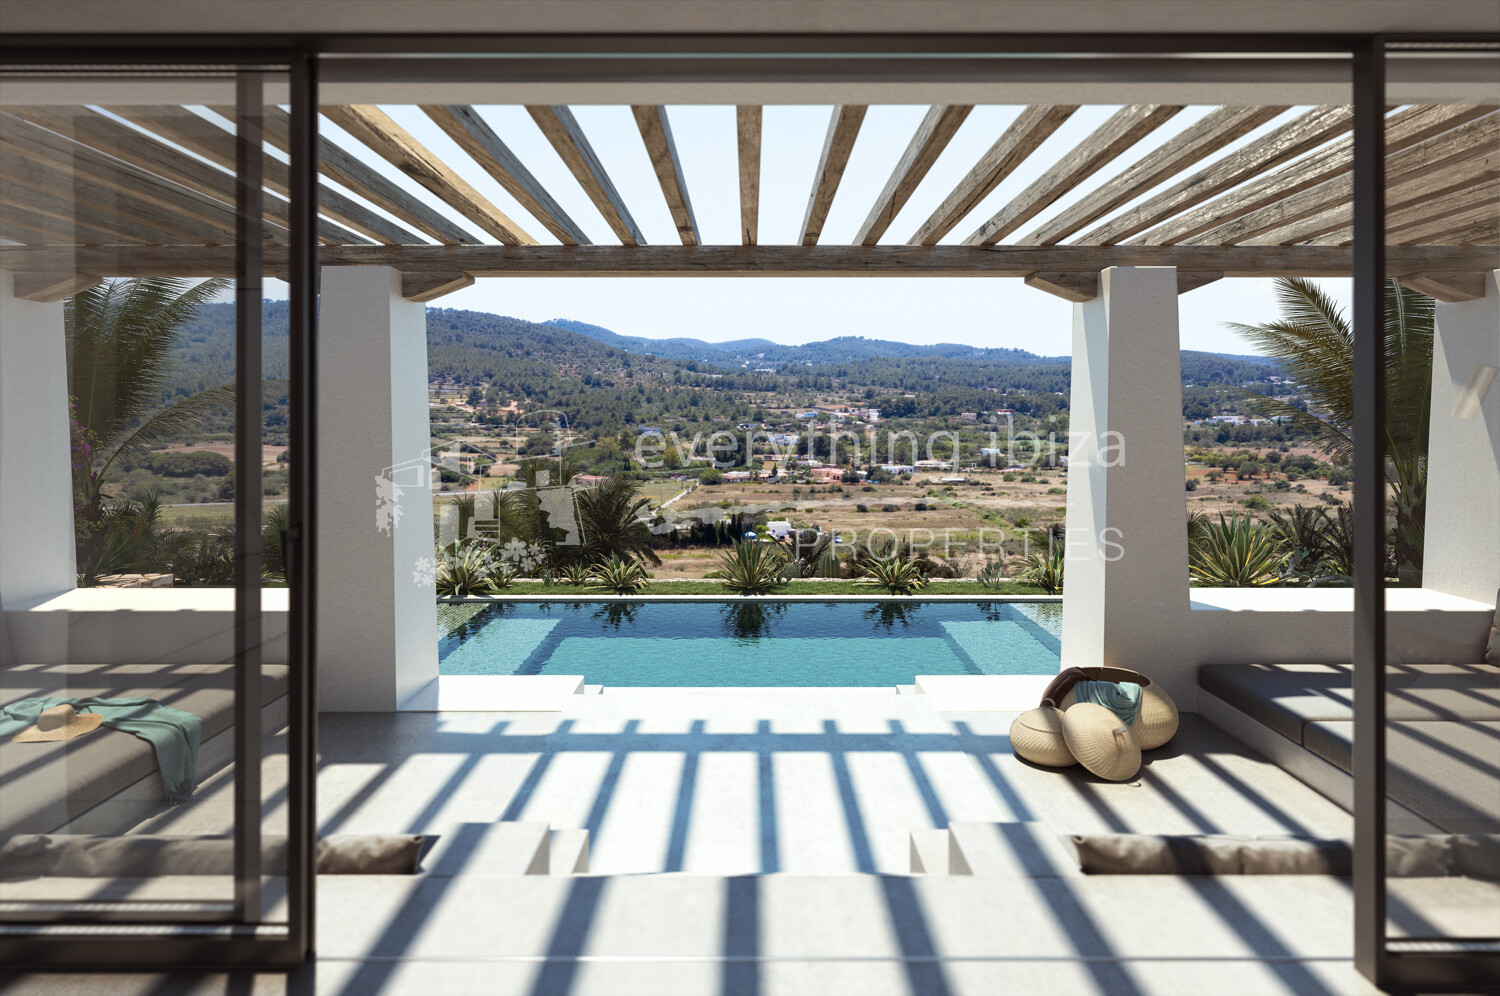 Stunning New Build Villa Designed by Blakstad,ref 1659, for sale in Ibiza by everything ibiza Properties